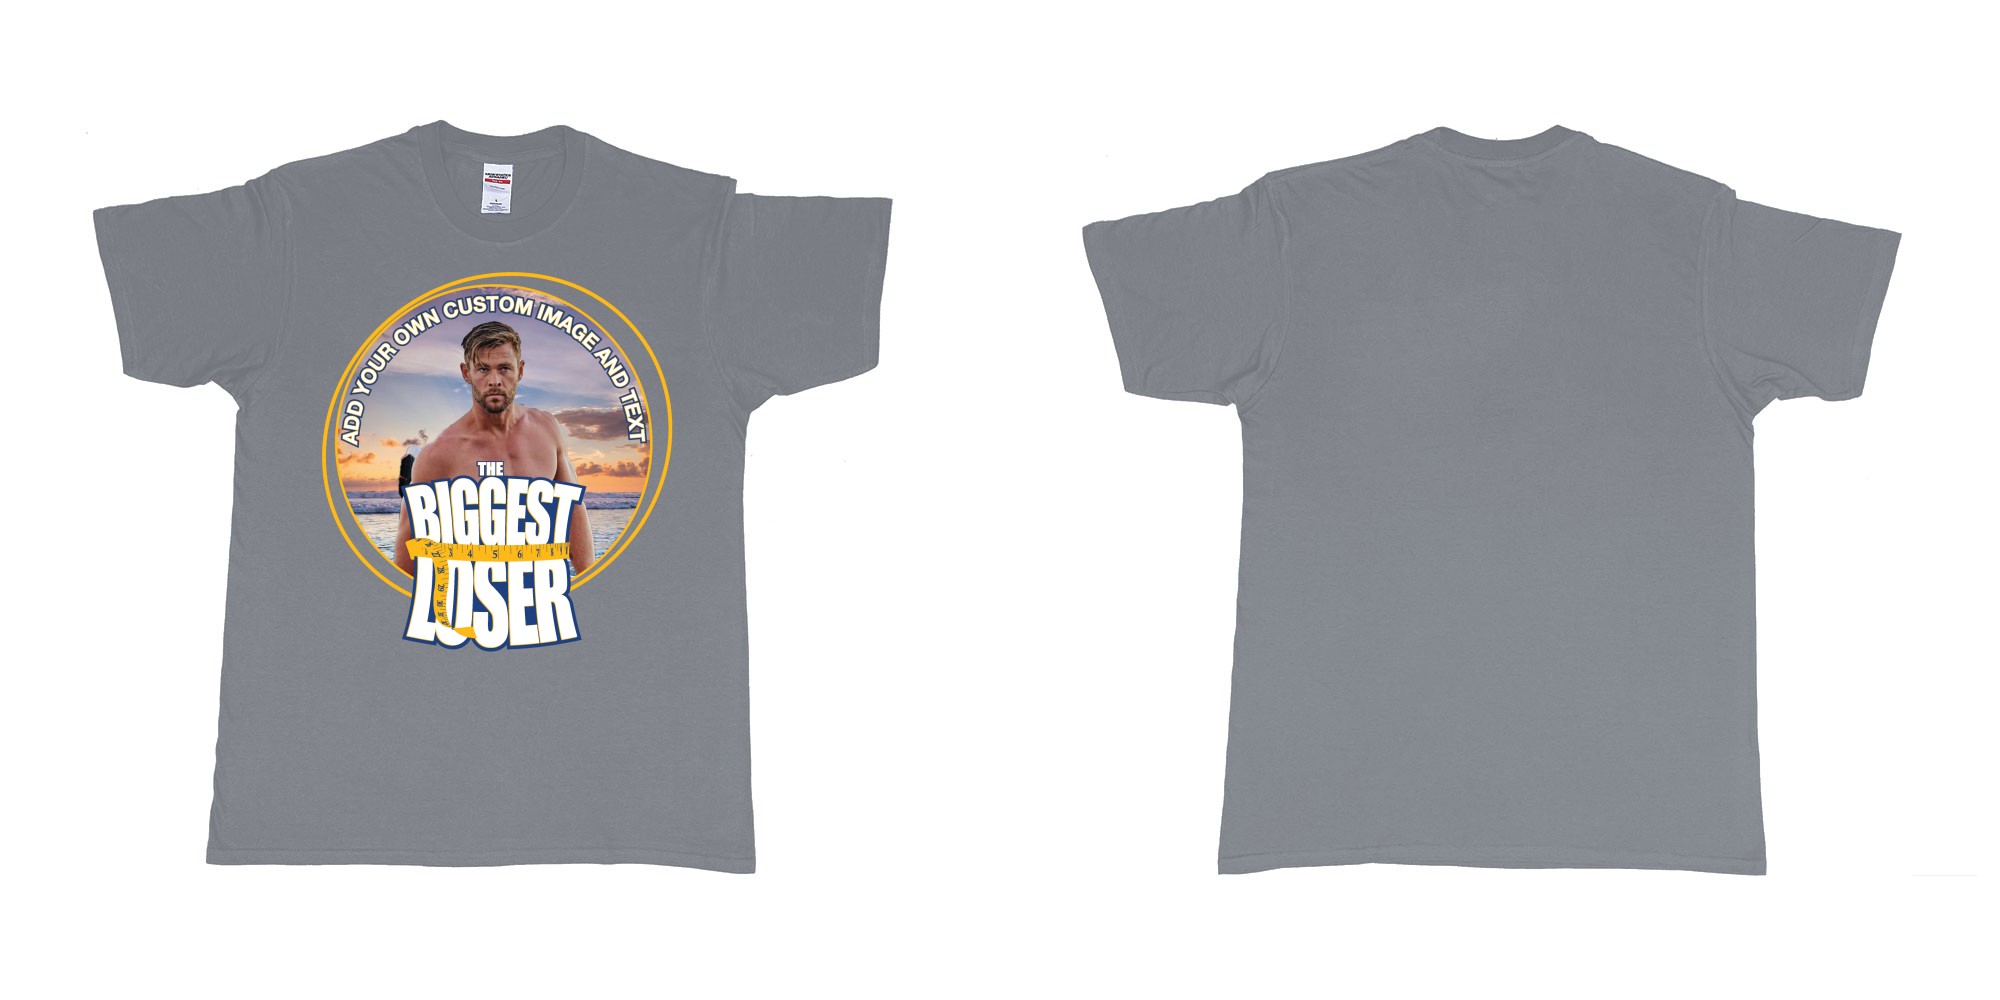 Custom tshirt design the biggest loser logo custom image funny tshirt design in fabric color misty choice your own text made in Bali by The Pirate Way